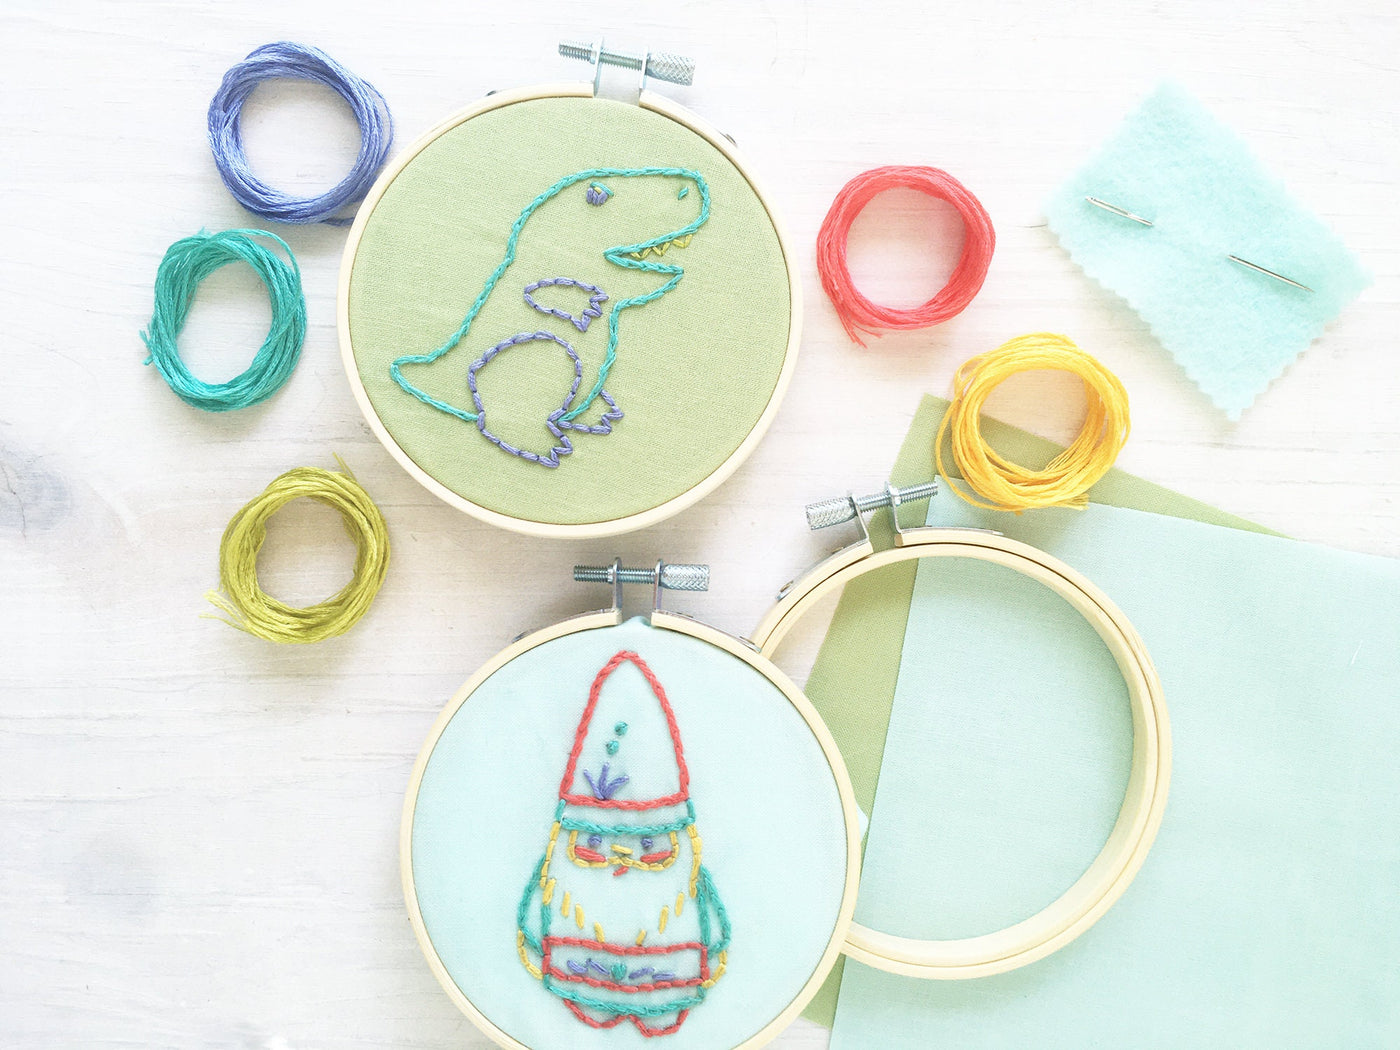 Kid Stitch Kit, Hand Embroidery For Kids, learn to embroider